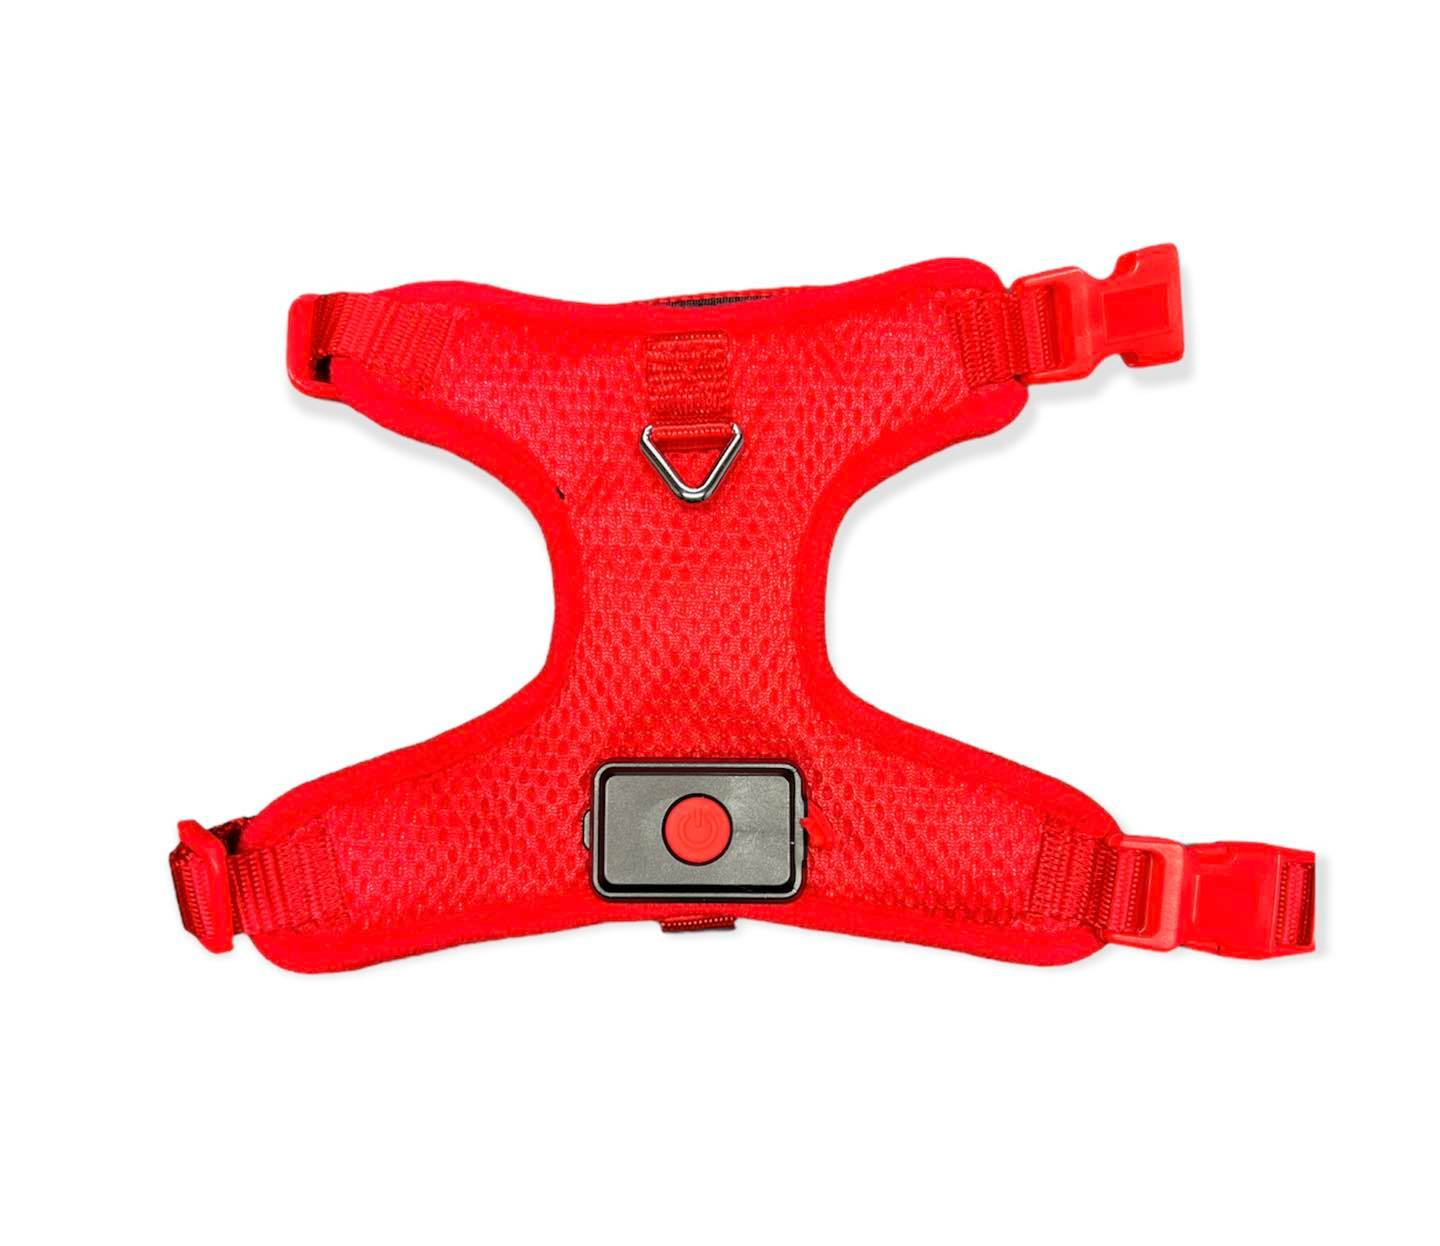 LED Dog Harness - Small (Red)